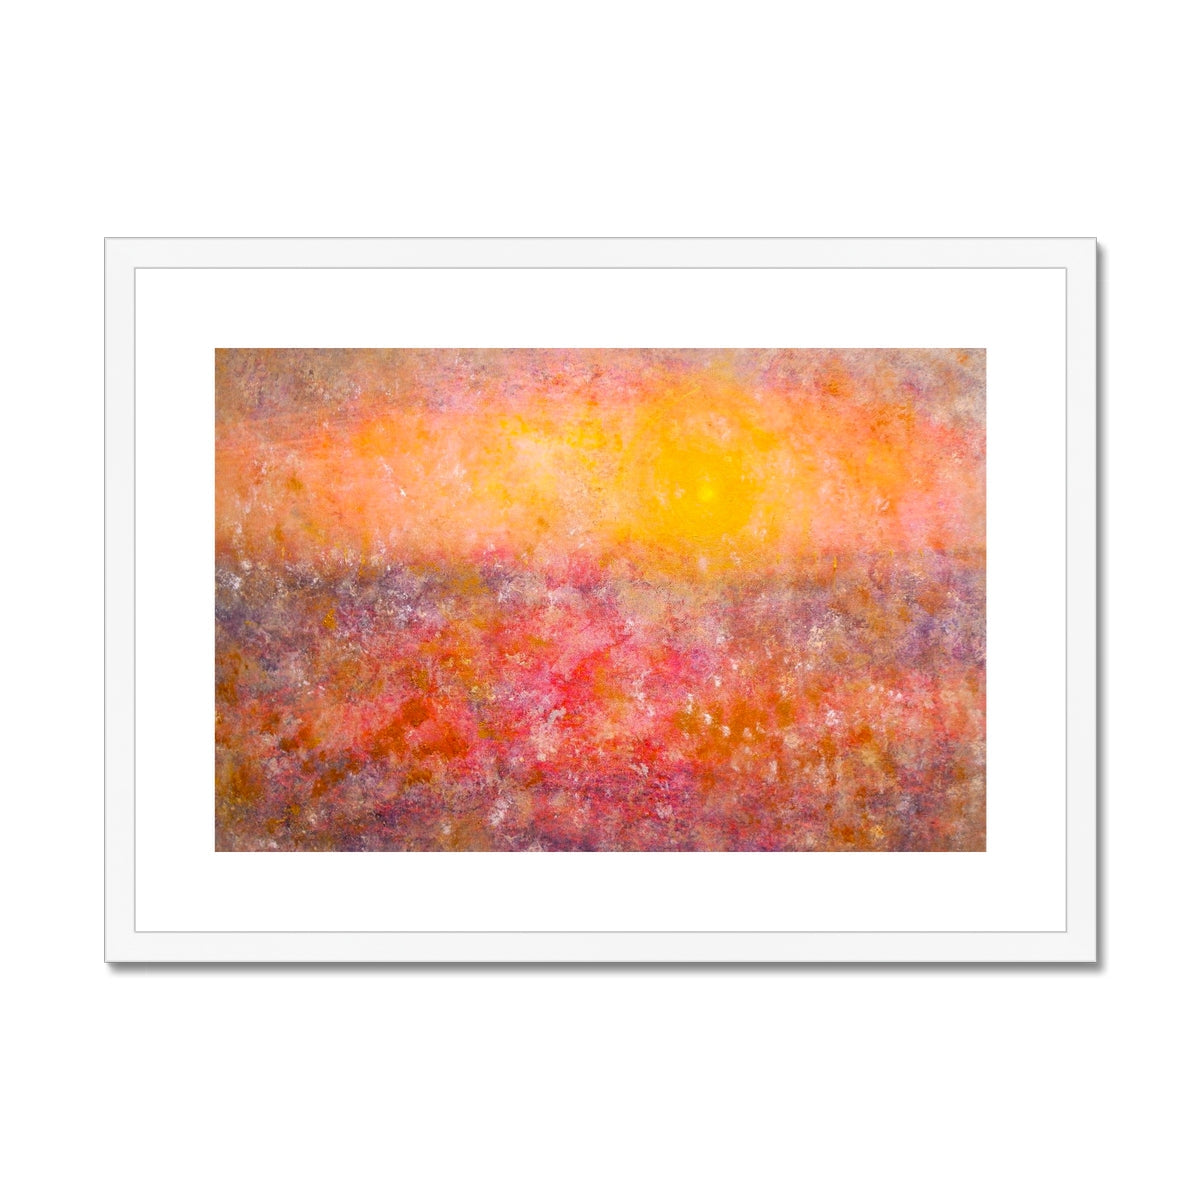 Sunrise Mist Horizon Abstract Painting | Framed & Mounted Prints From Scotland-Framed & Mounted Prints-Abstract & Impressionistic Art Gallery-A2 Landscape-White Frame-Paintings, Prints, Homeware, Art Gifts From Scotland By Scottish Artist Kevin Hunter